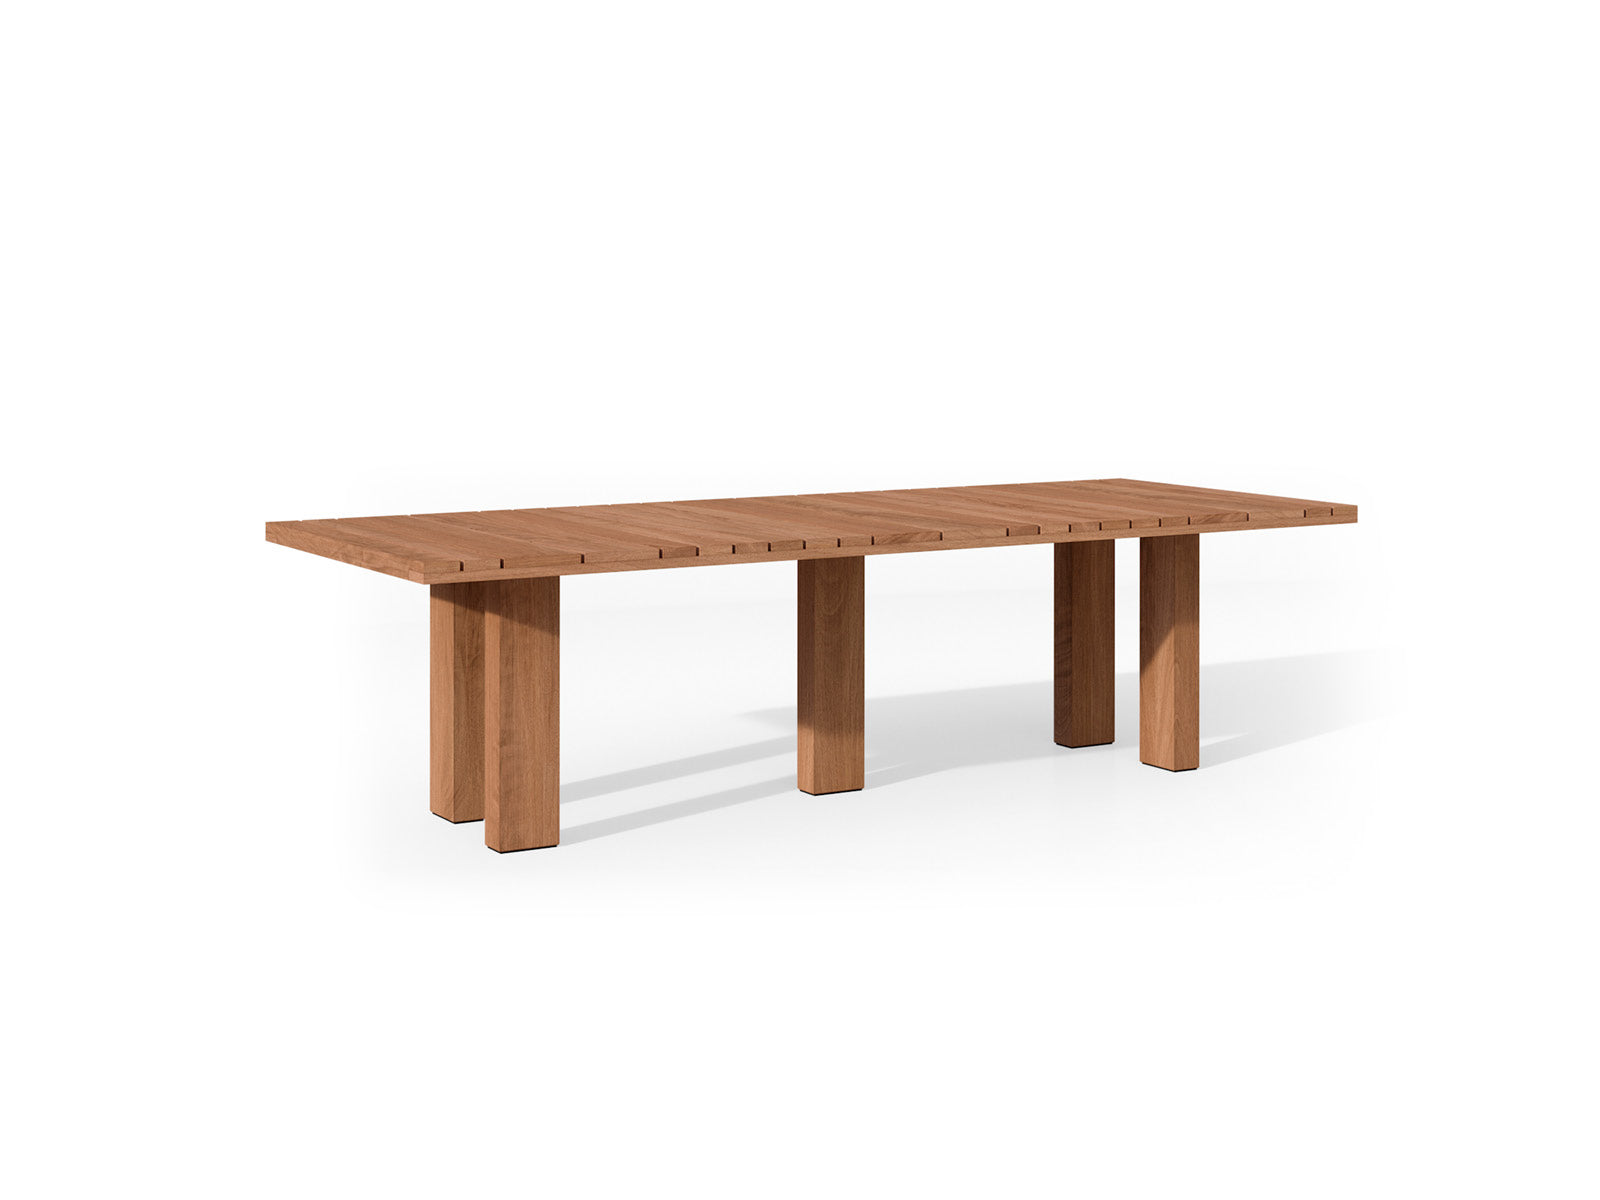 Suro dining table